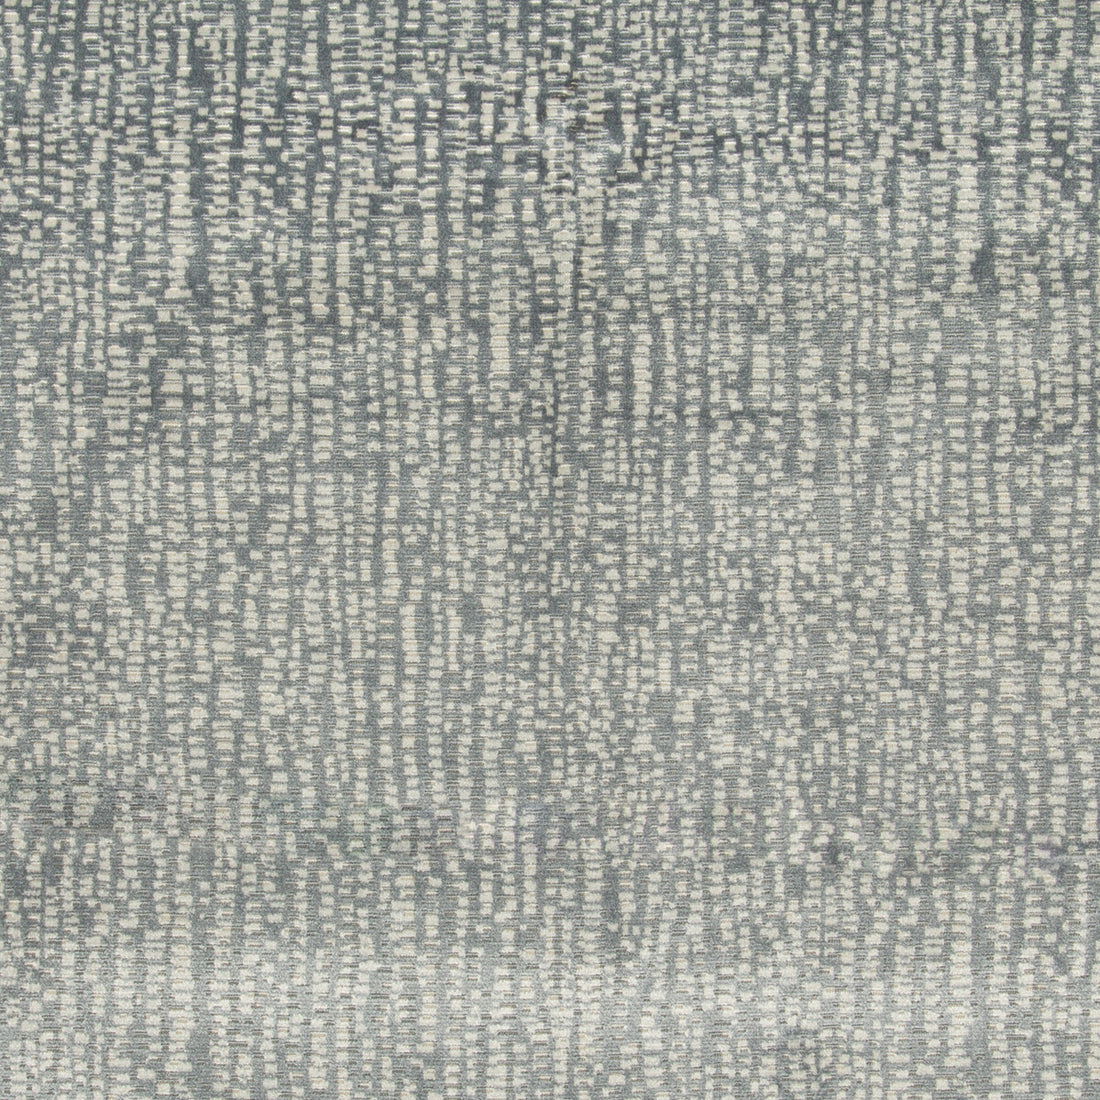 Stepping Stones fabric in rain color - pattern 34788.21.0 - by Kravet Couture in the Artisan Velvets collection